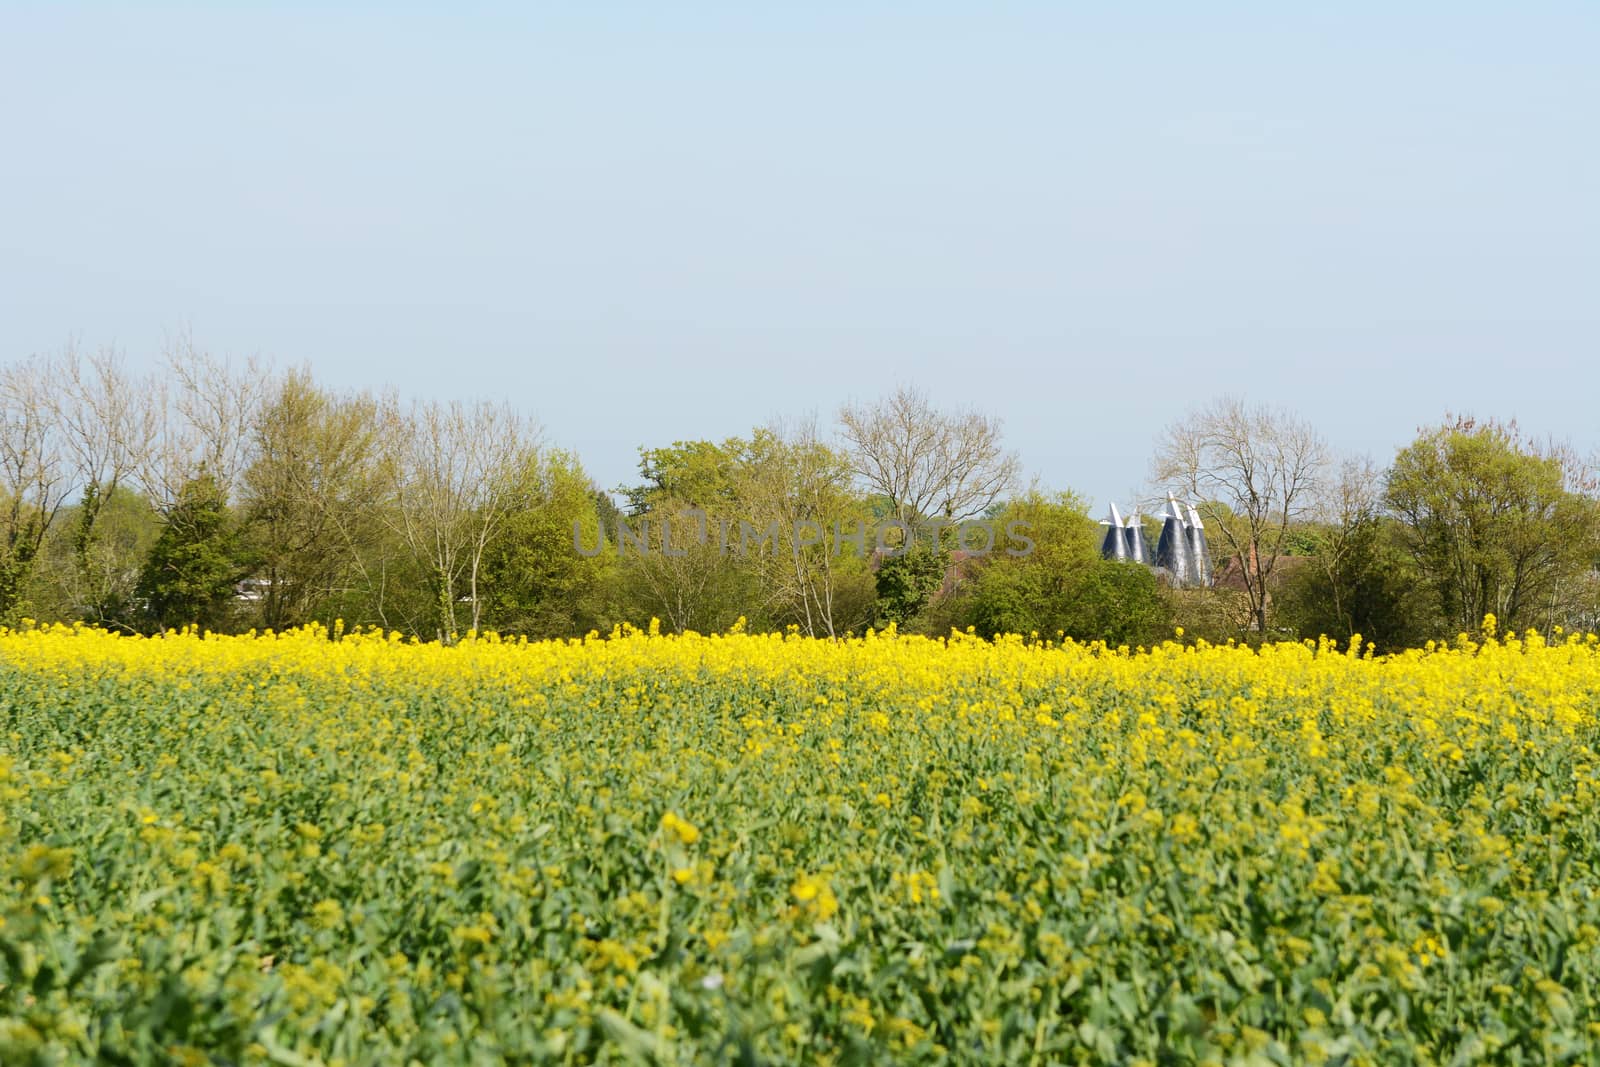 Kent oast houses with white cowls stand between trees beyond a farm field of yellow rapeseed in spring